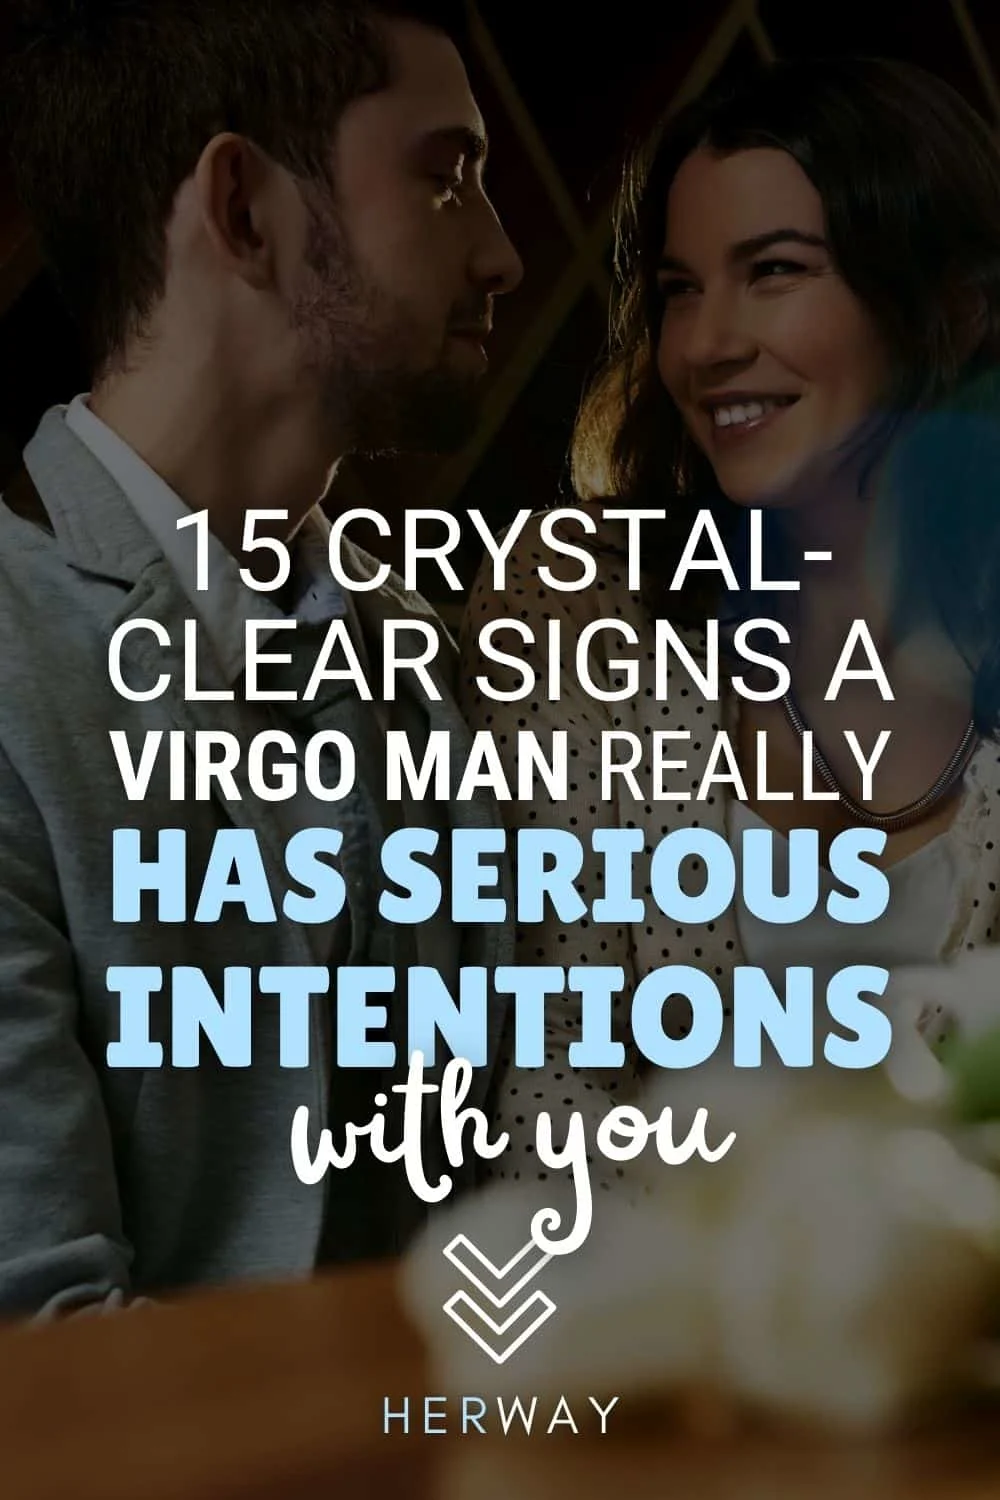 15 Crystal-Clear Signs A Virgo Man Is Serious About You Pinterest